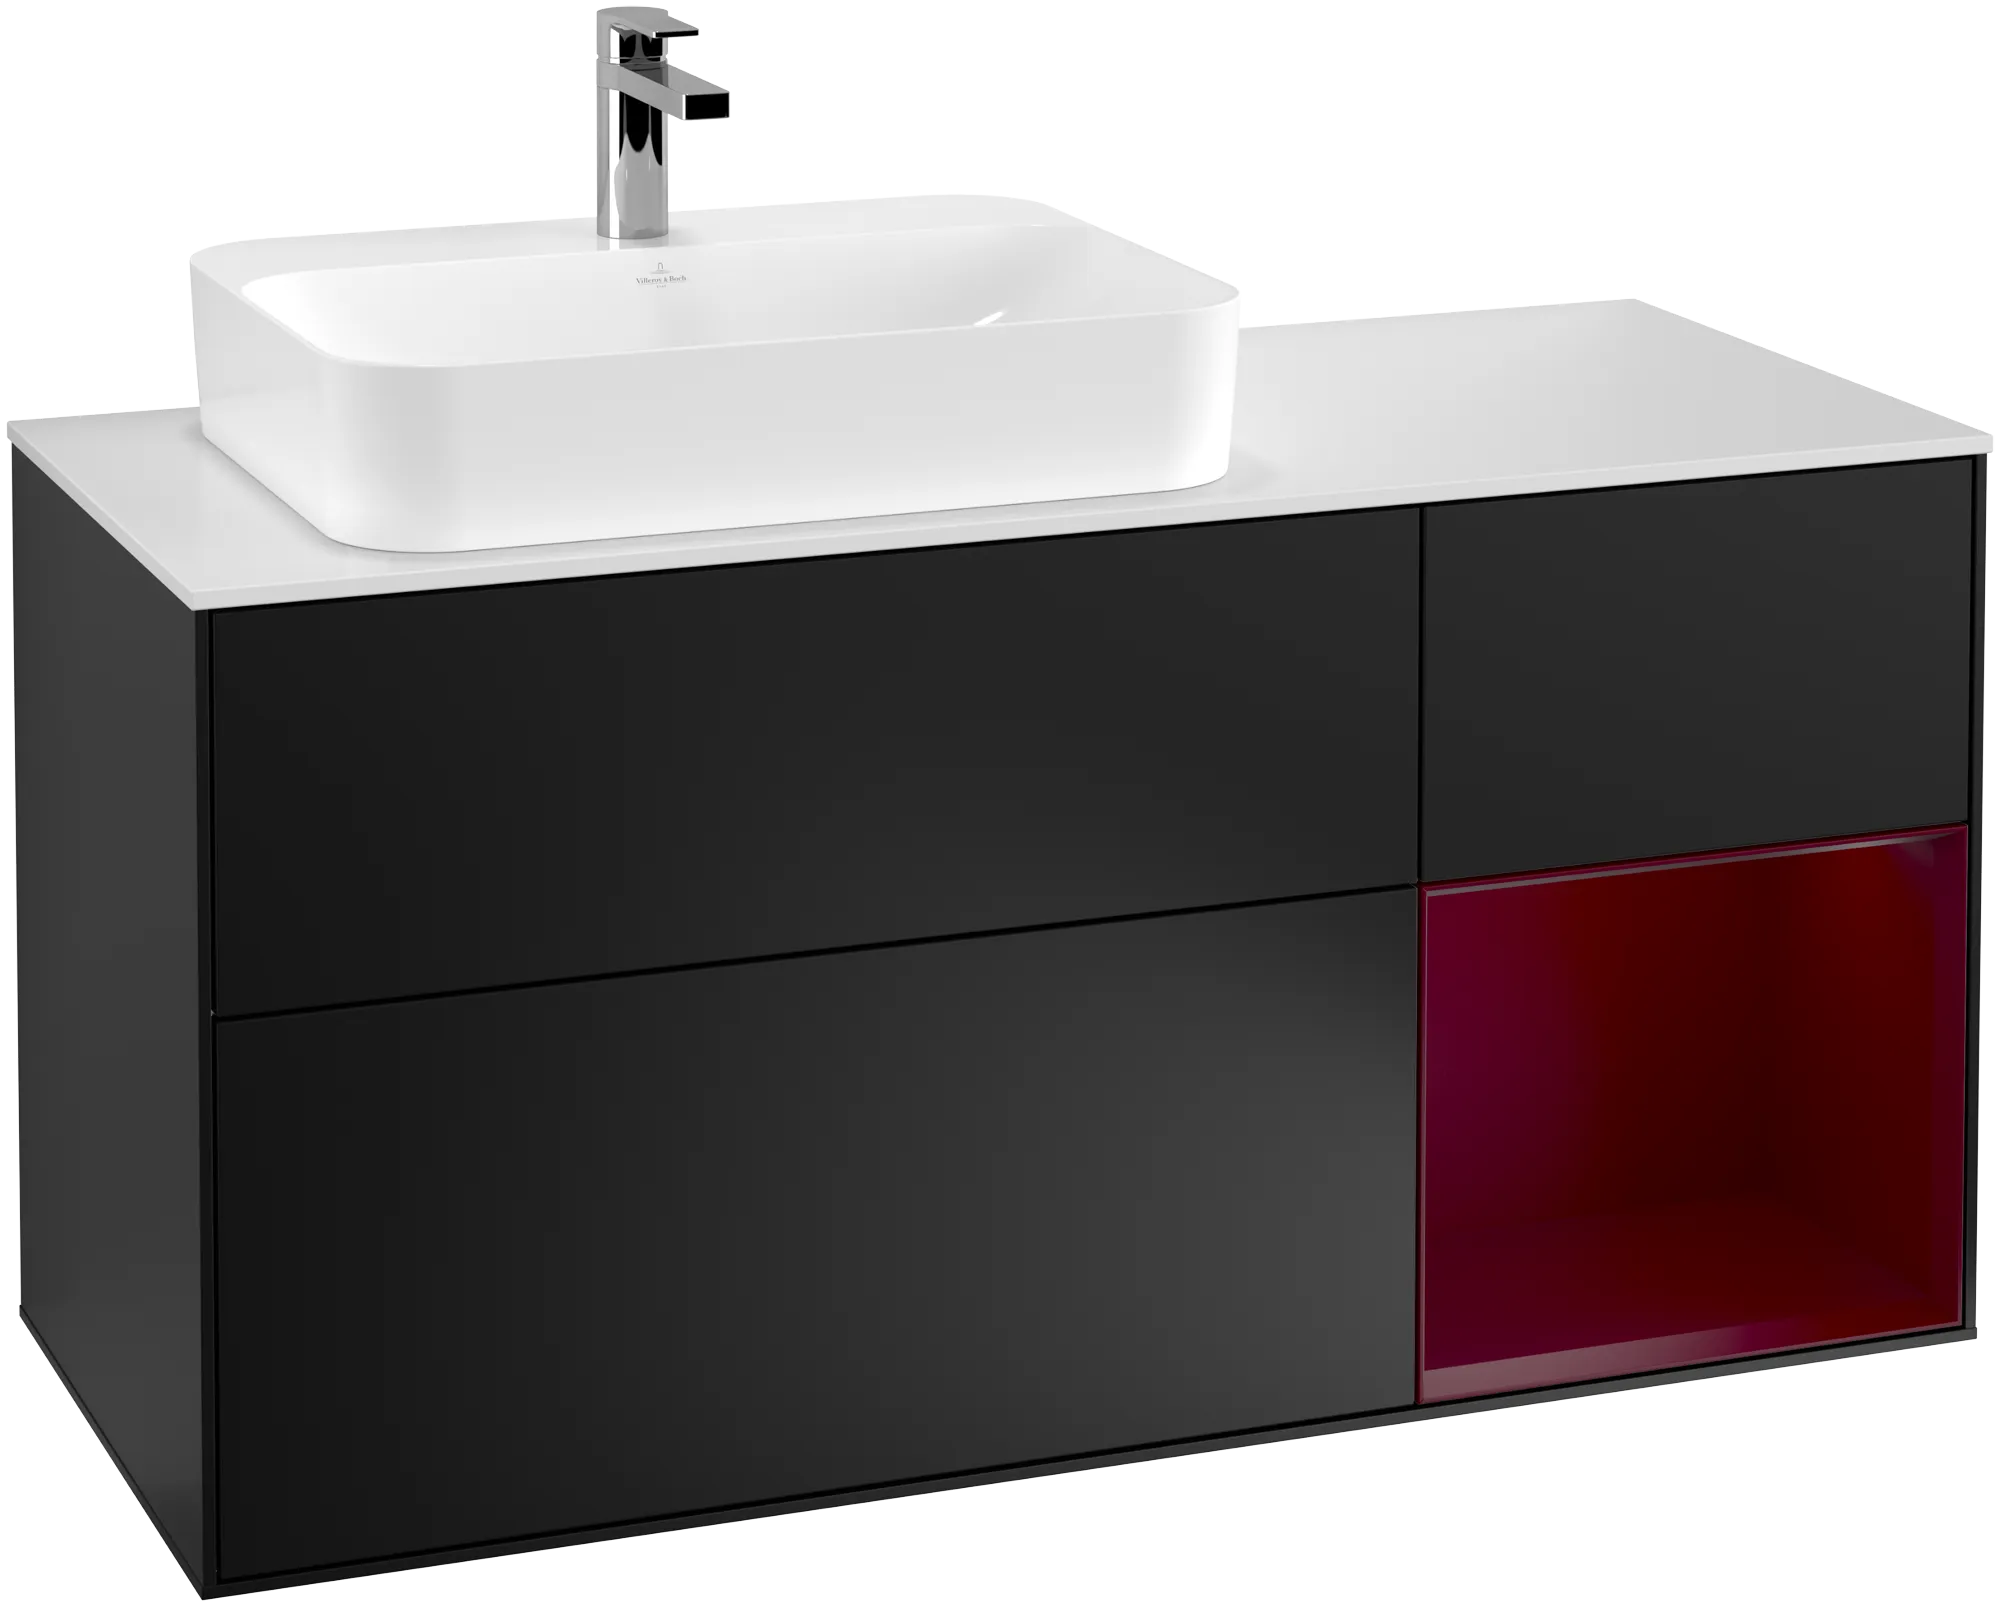 Picture of VILLEROY BOCH Finion Vanity unit, with lighting, 3 pull-out compartments, 1200 x 603 x 501 mm, Black Matt Lacquer / Peony Matt Lacquer / Glass White Matt #G401HBPD